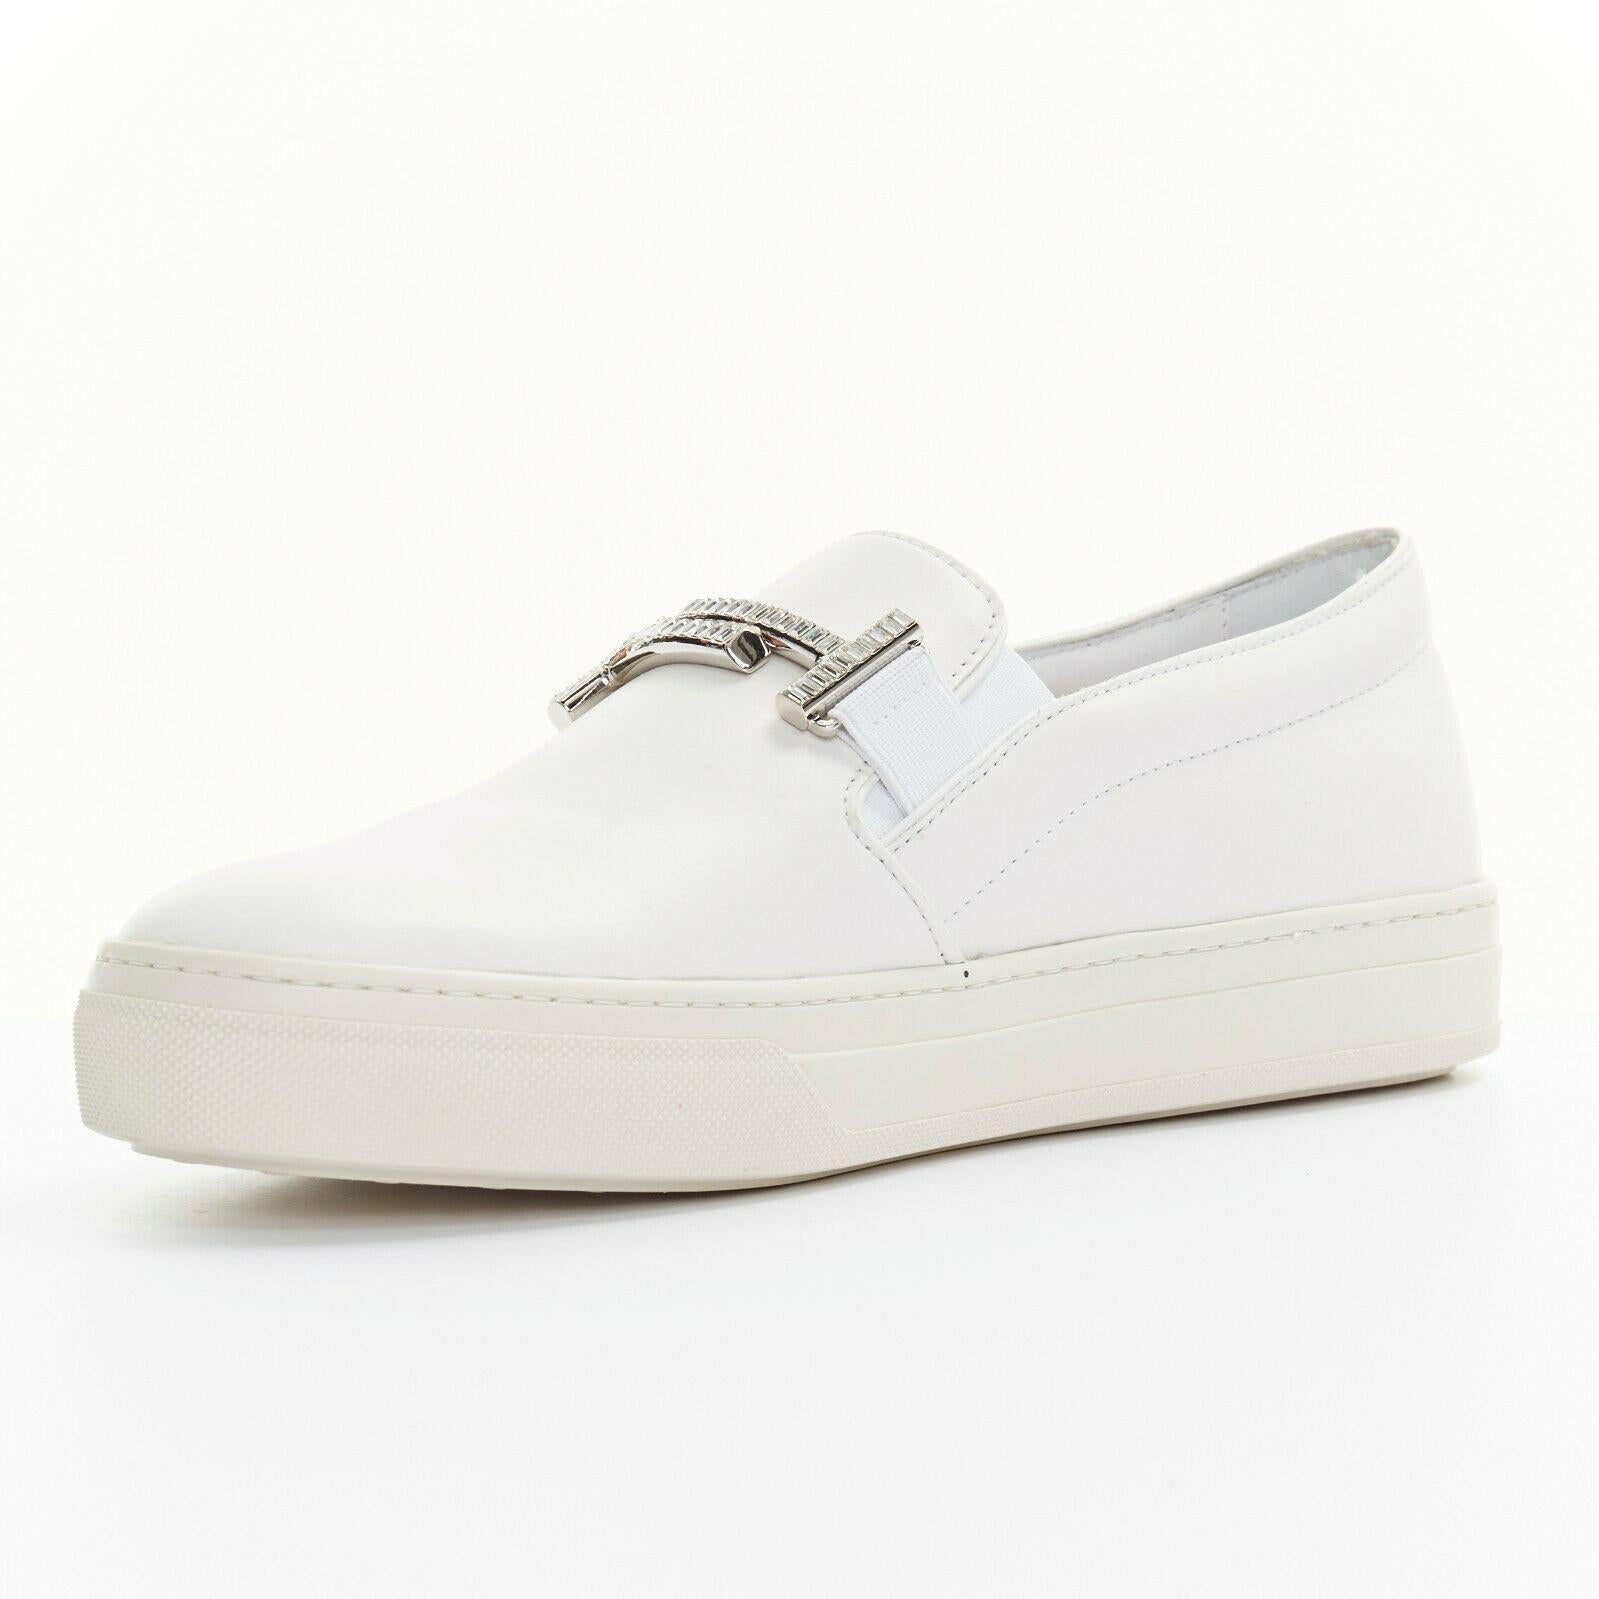 Women's new TOD'S white leather crystal paved buckle round toe sneaker skate shoe EU37.5